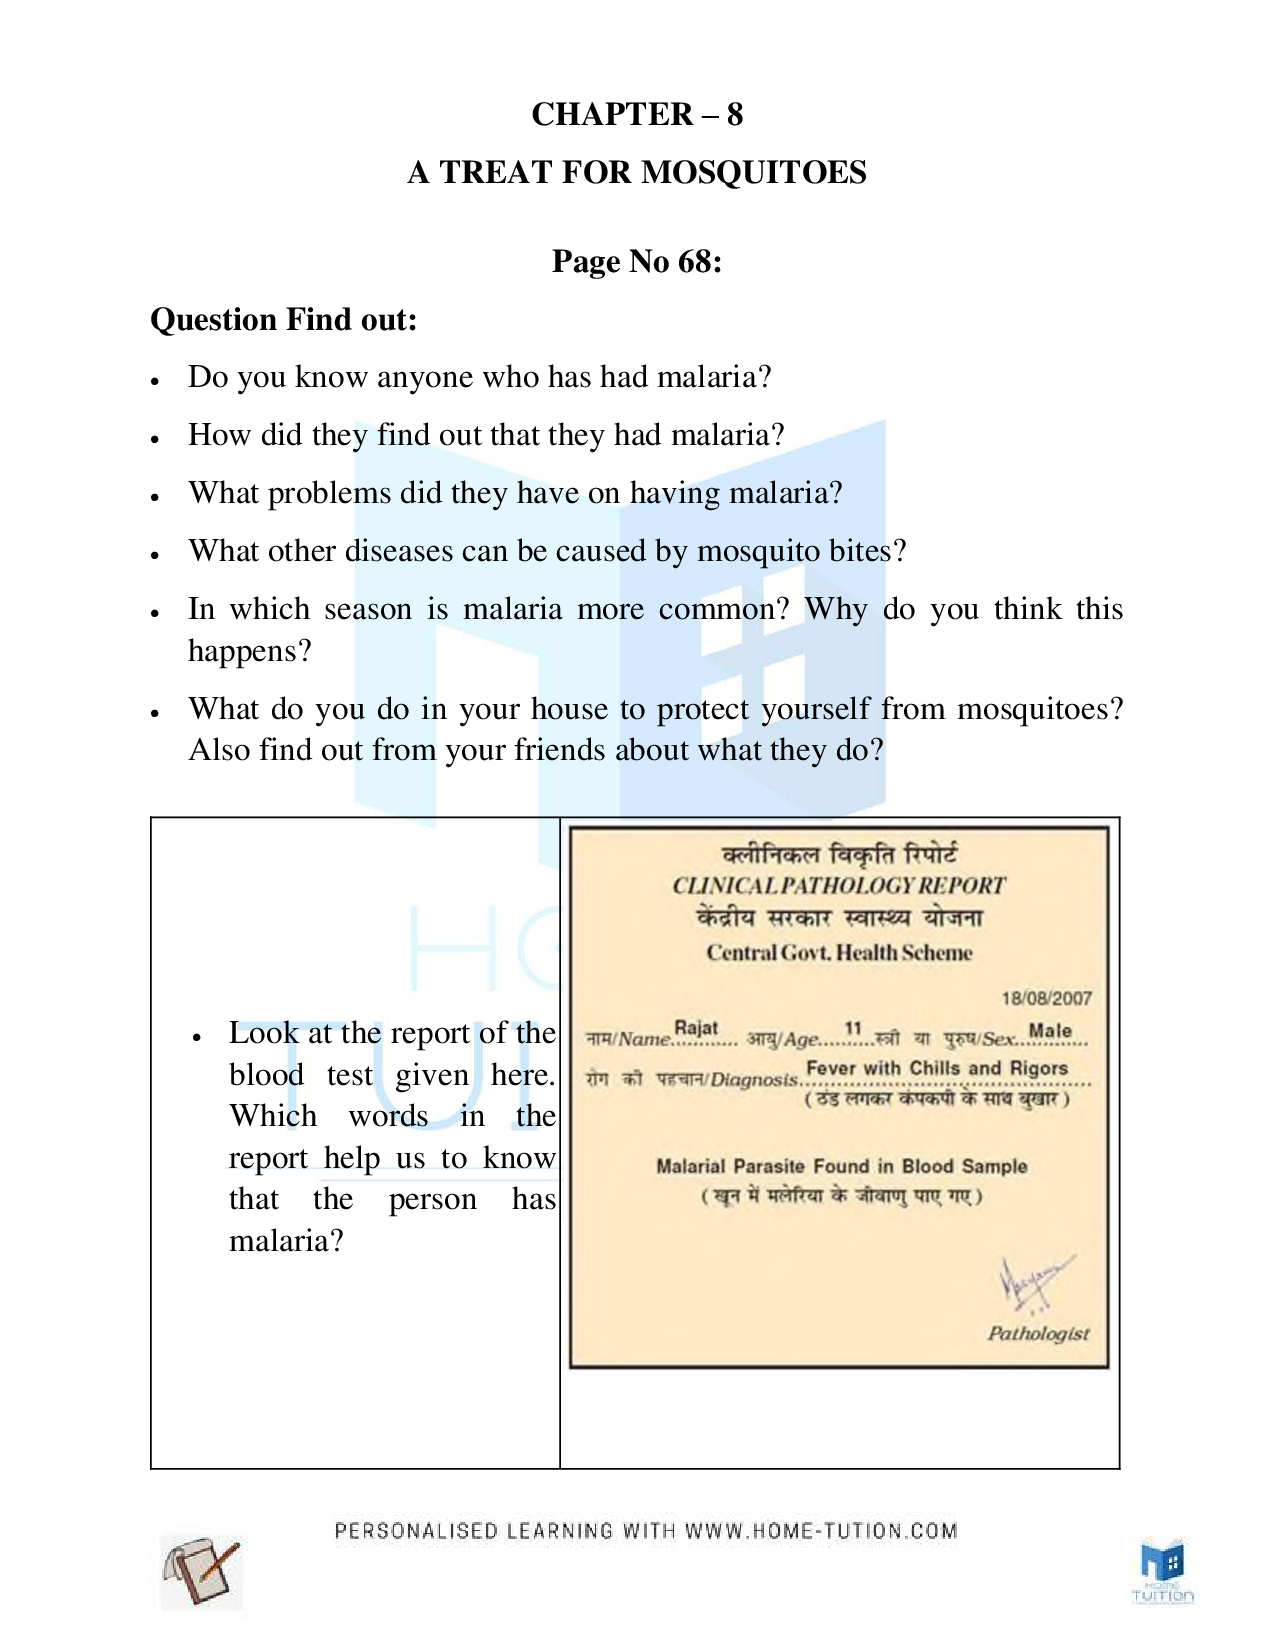 NCERT Class 5 EVS Chapter 8 A Treat or Mosquitoes